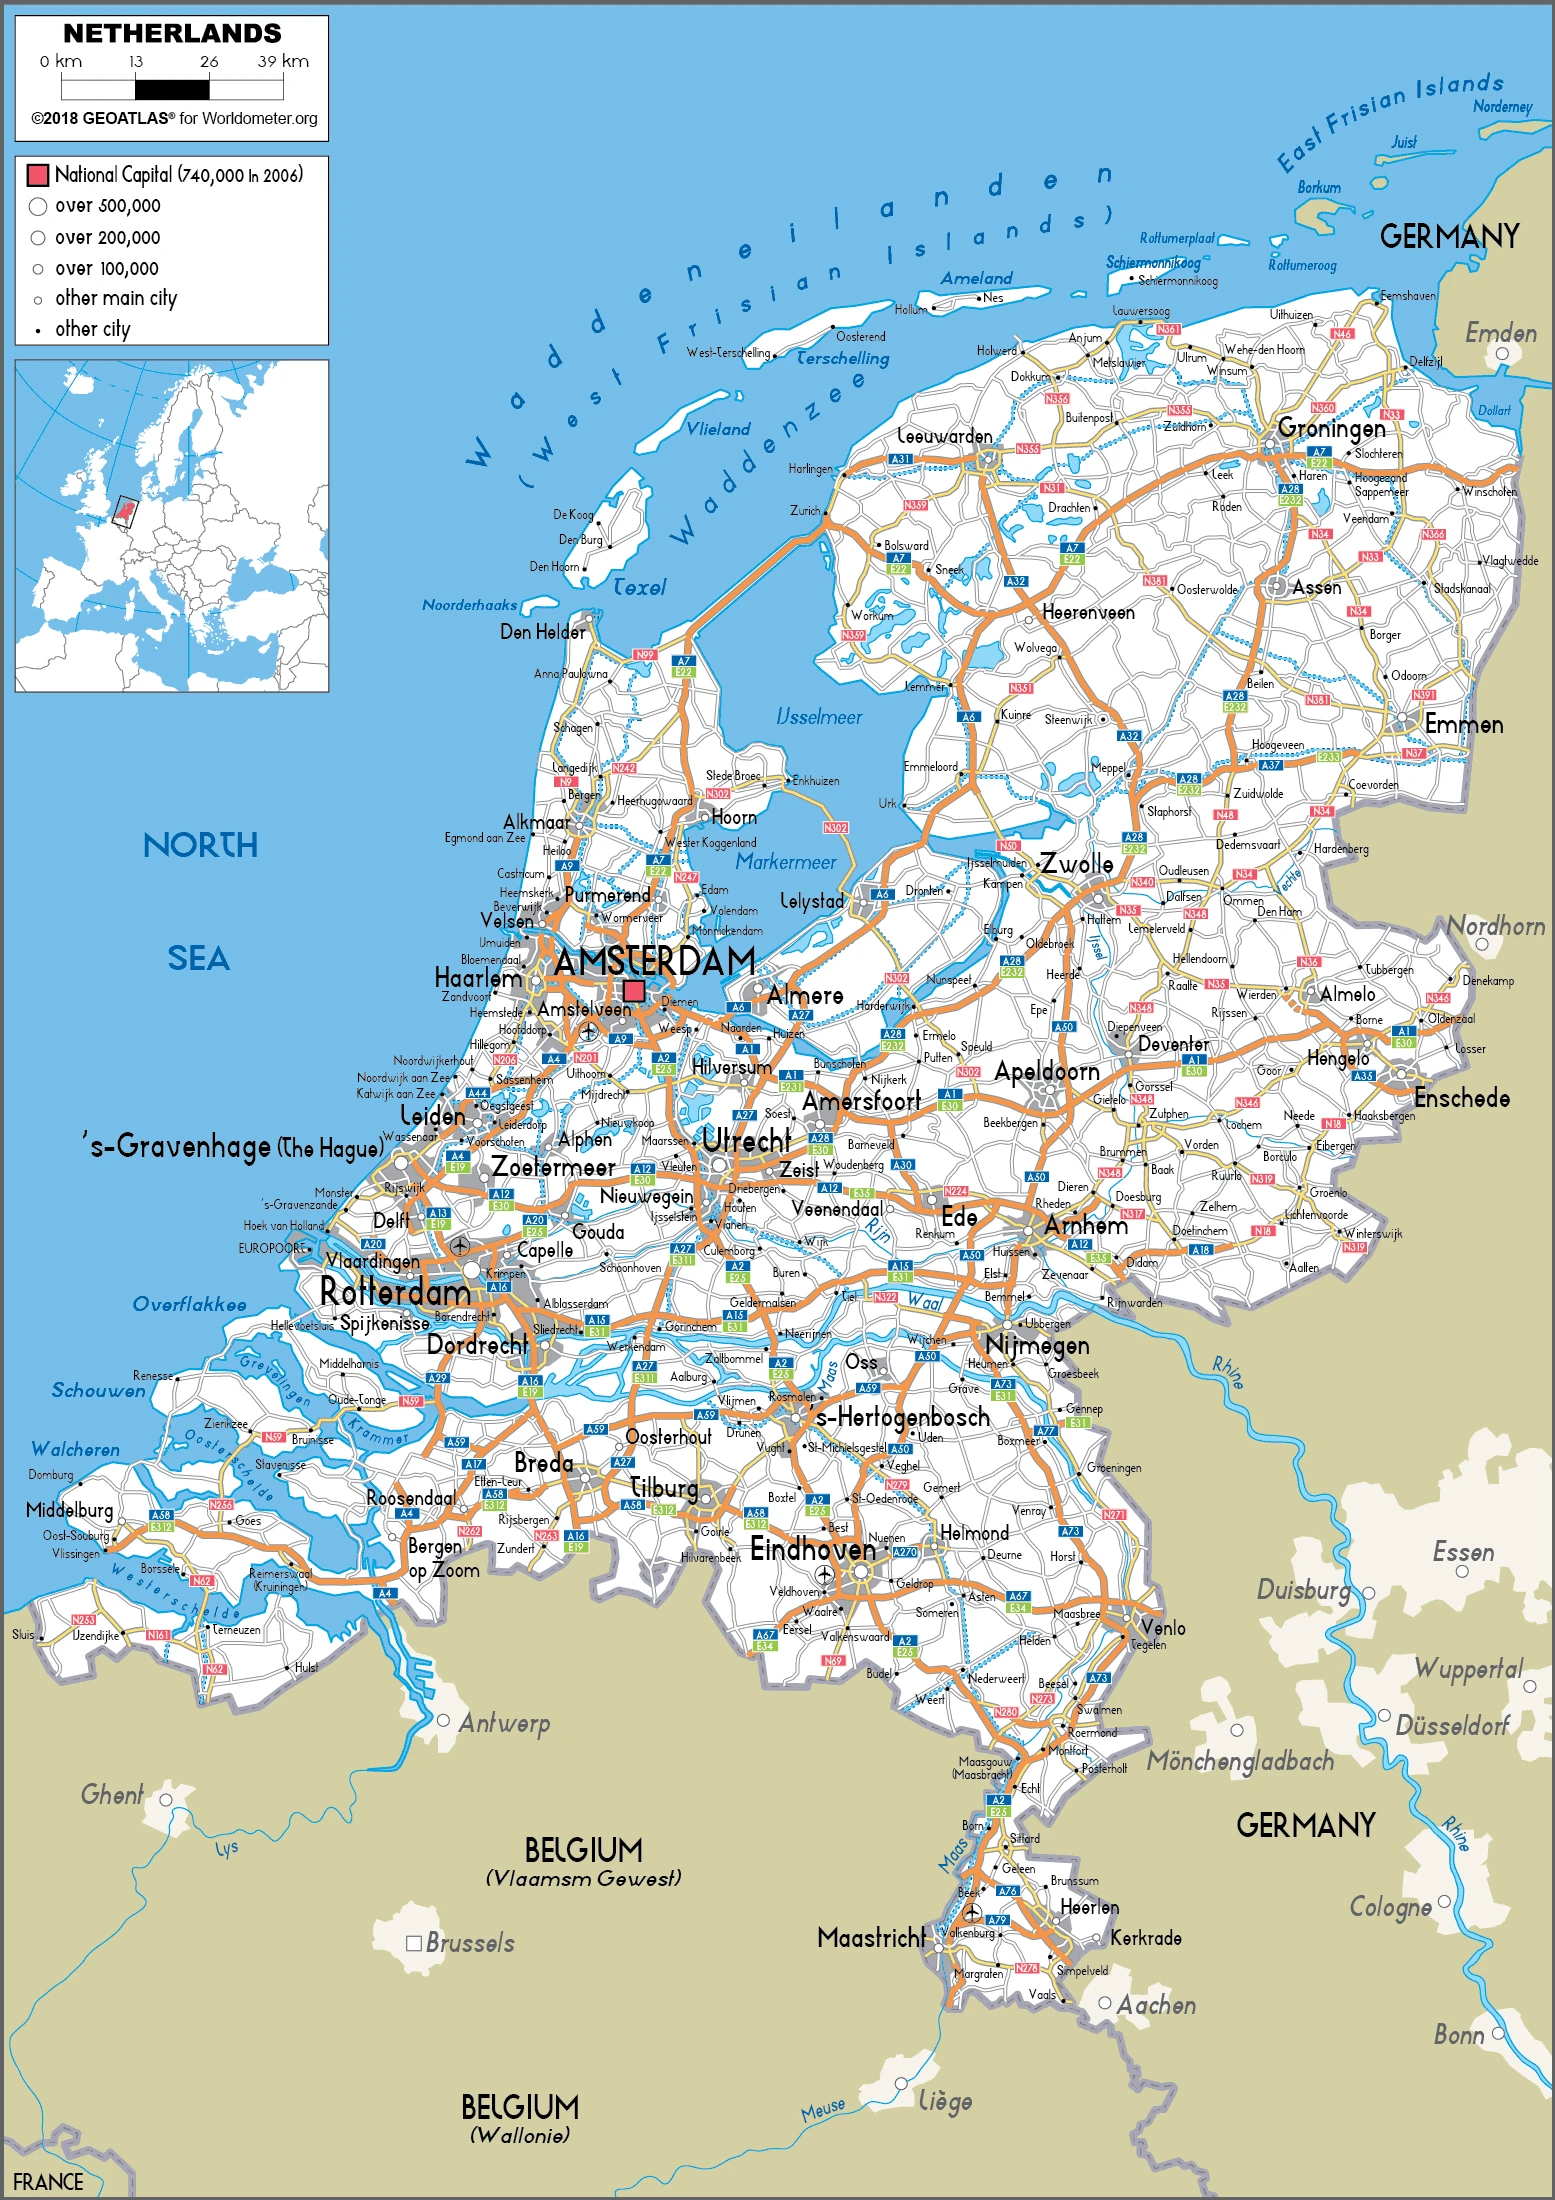 The route plan of the Dutch roadways.